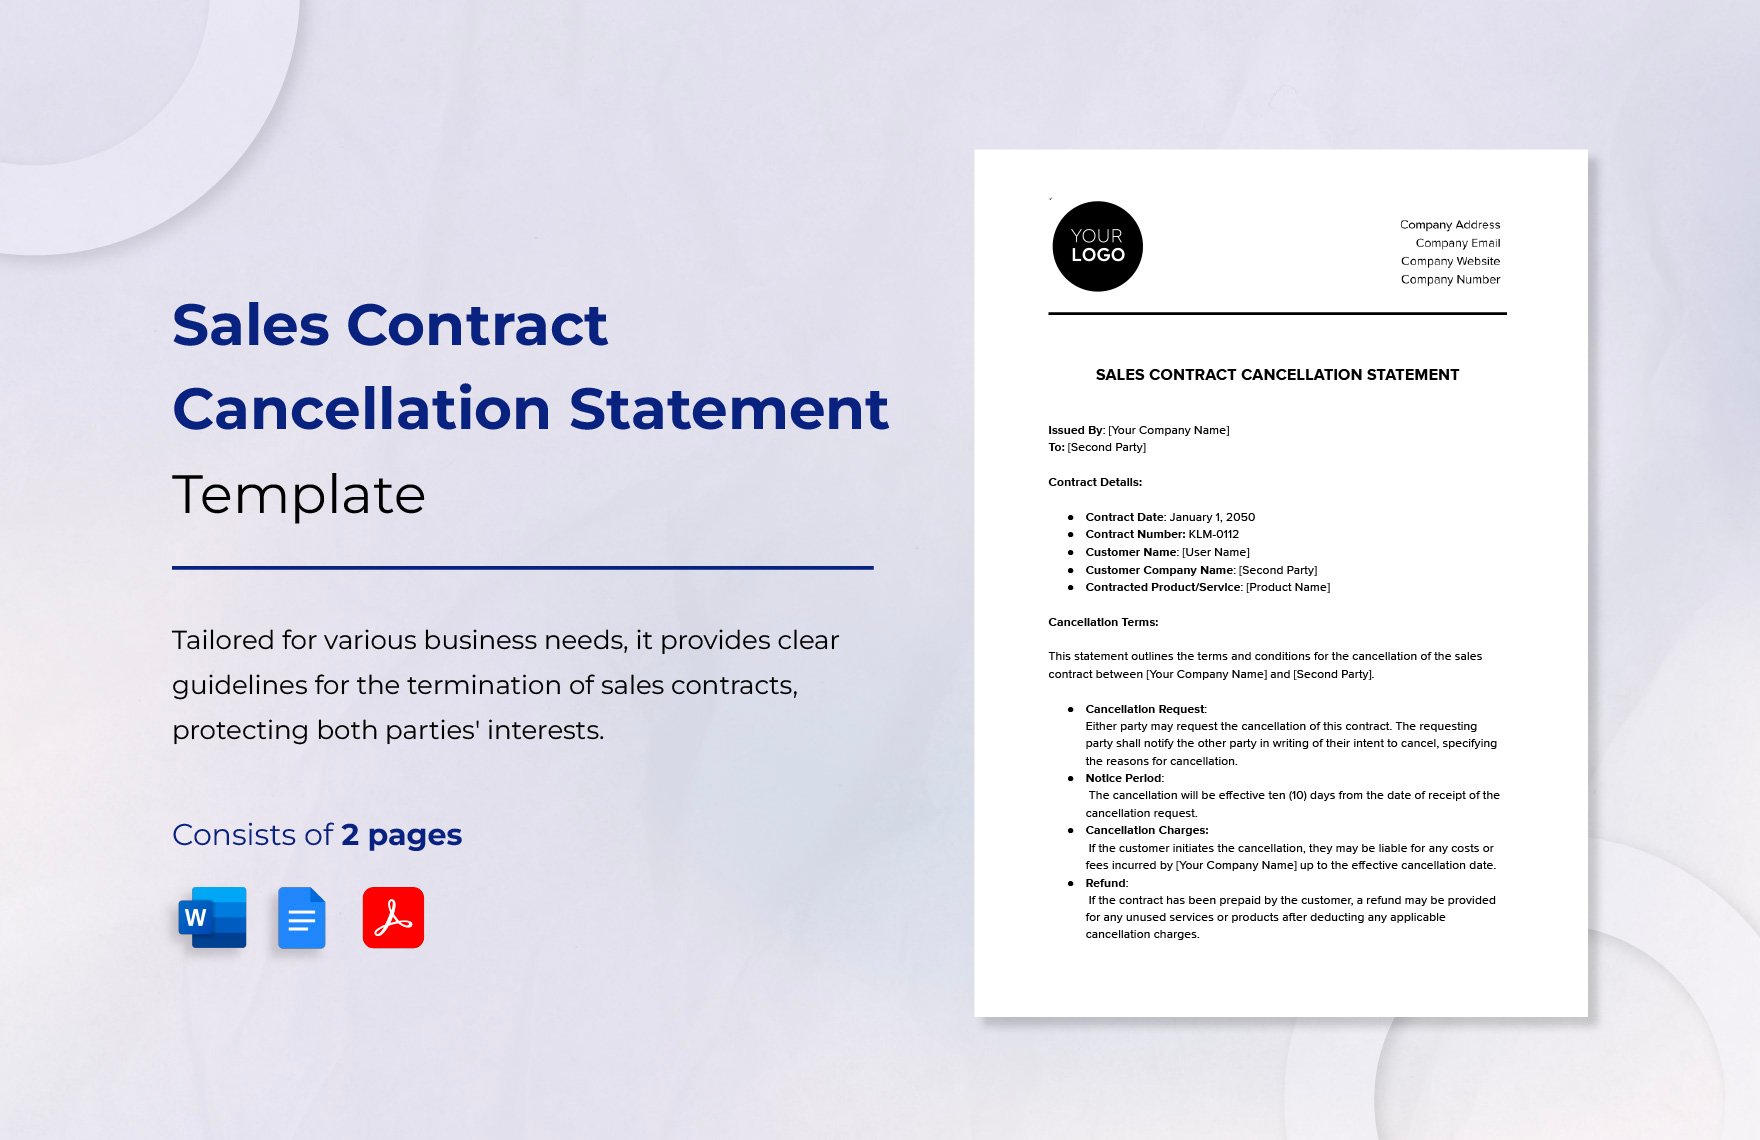 Sales Contract Cancellation Statement Template in Word, Google Docs, PDF